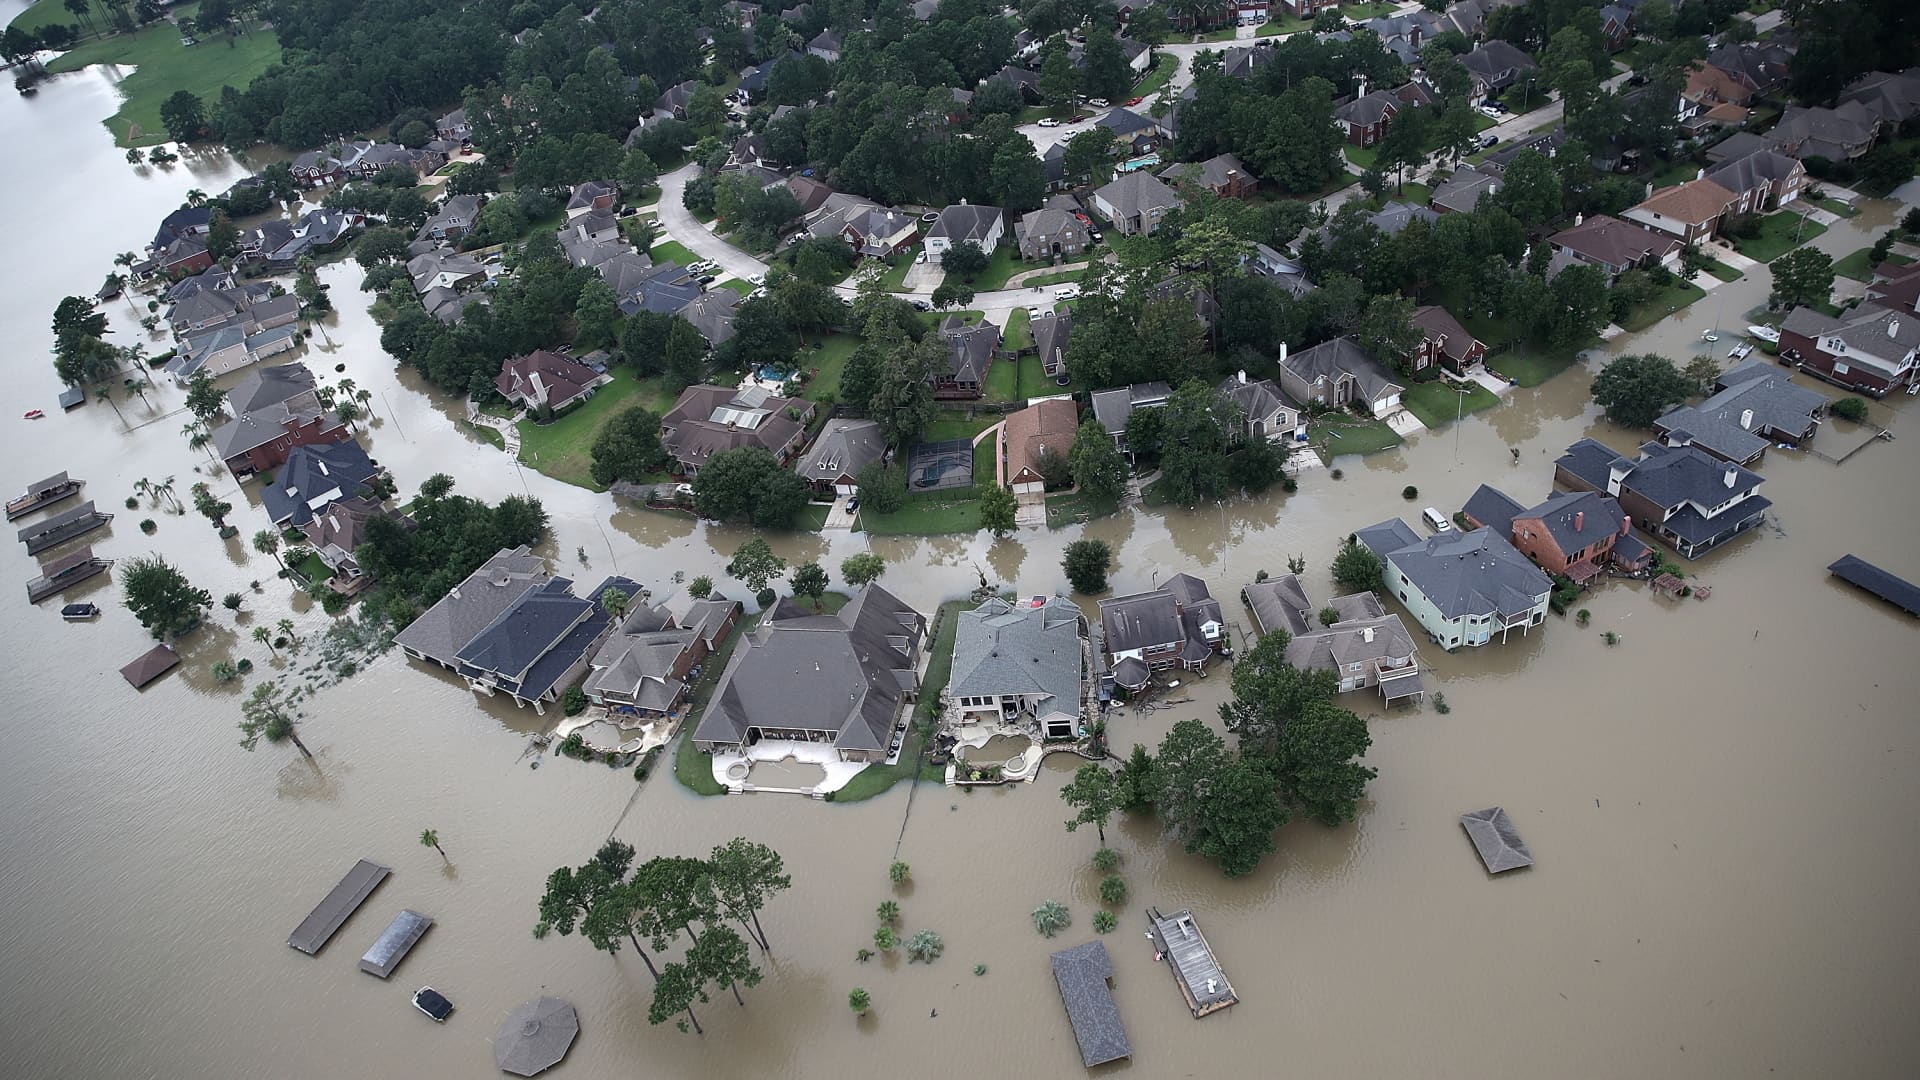 Flooded homes are shown near Lake Houston following Hurricane Harvey August 30, 2017 in Houston, Texas.